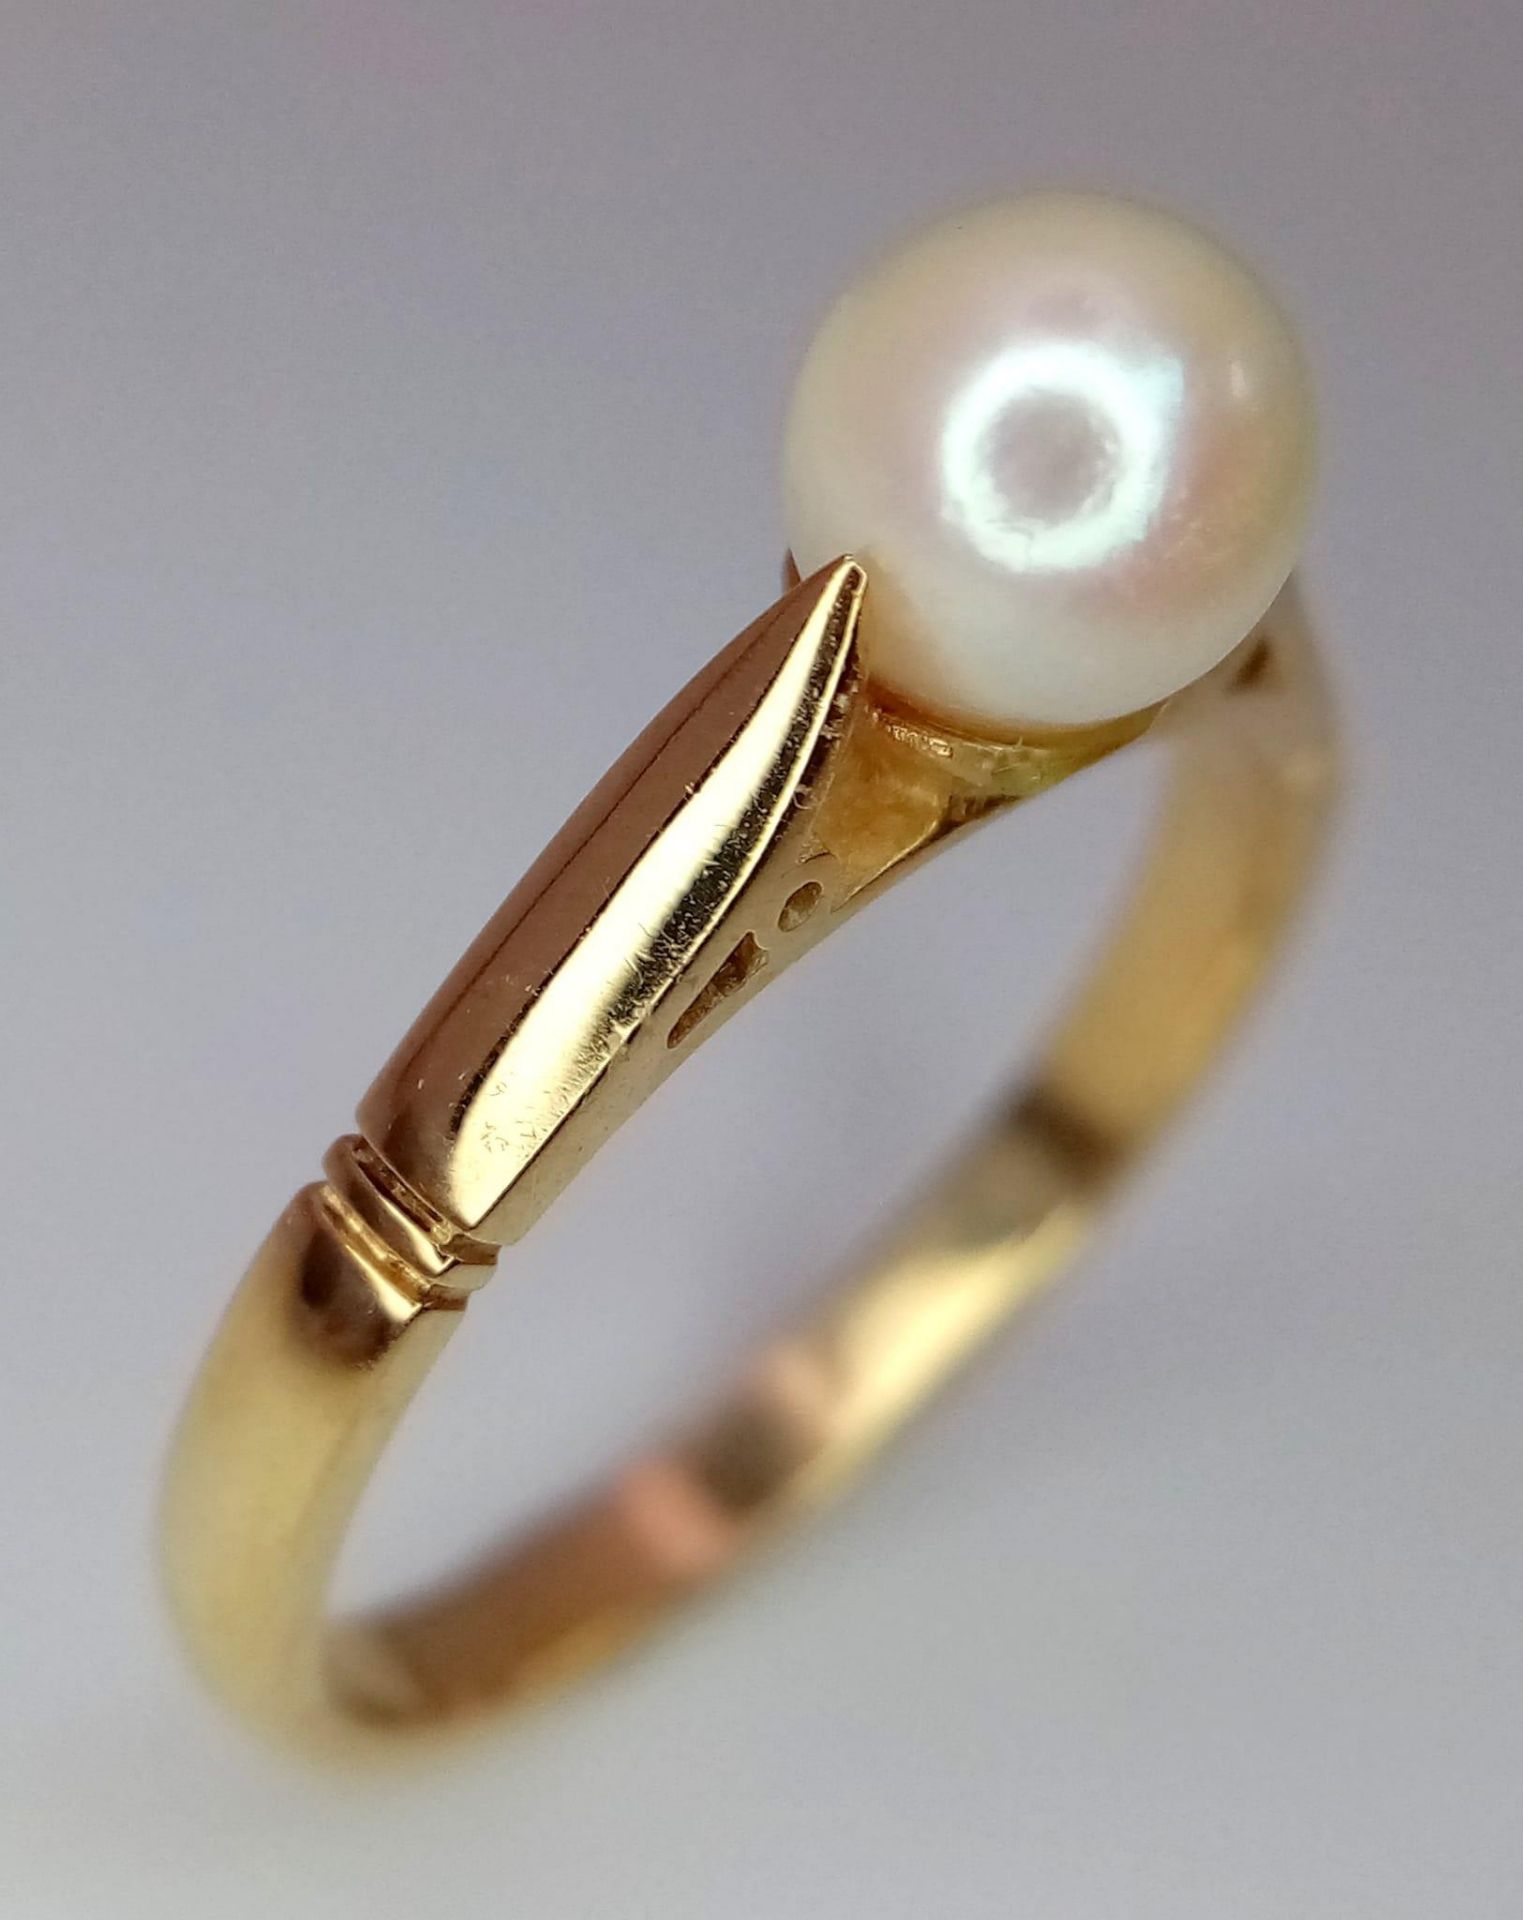 9k yellow gold ring with single cultured pearl. Weight: 2.5g Size O (pearl: 6mm) - Bild 2 aus 4